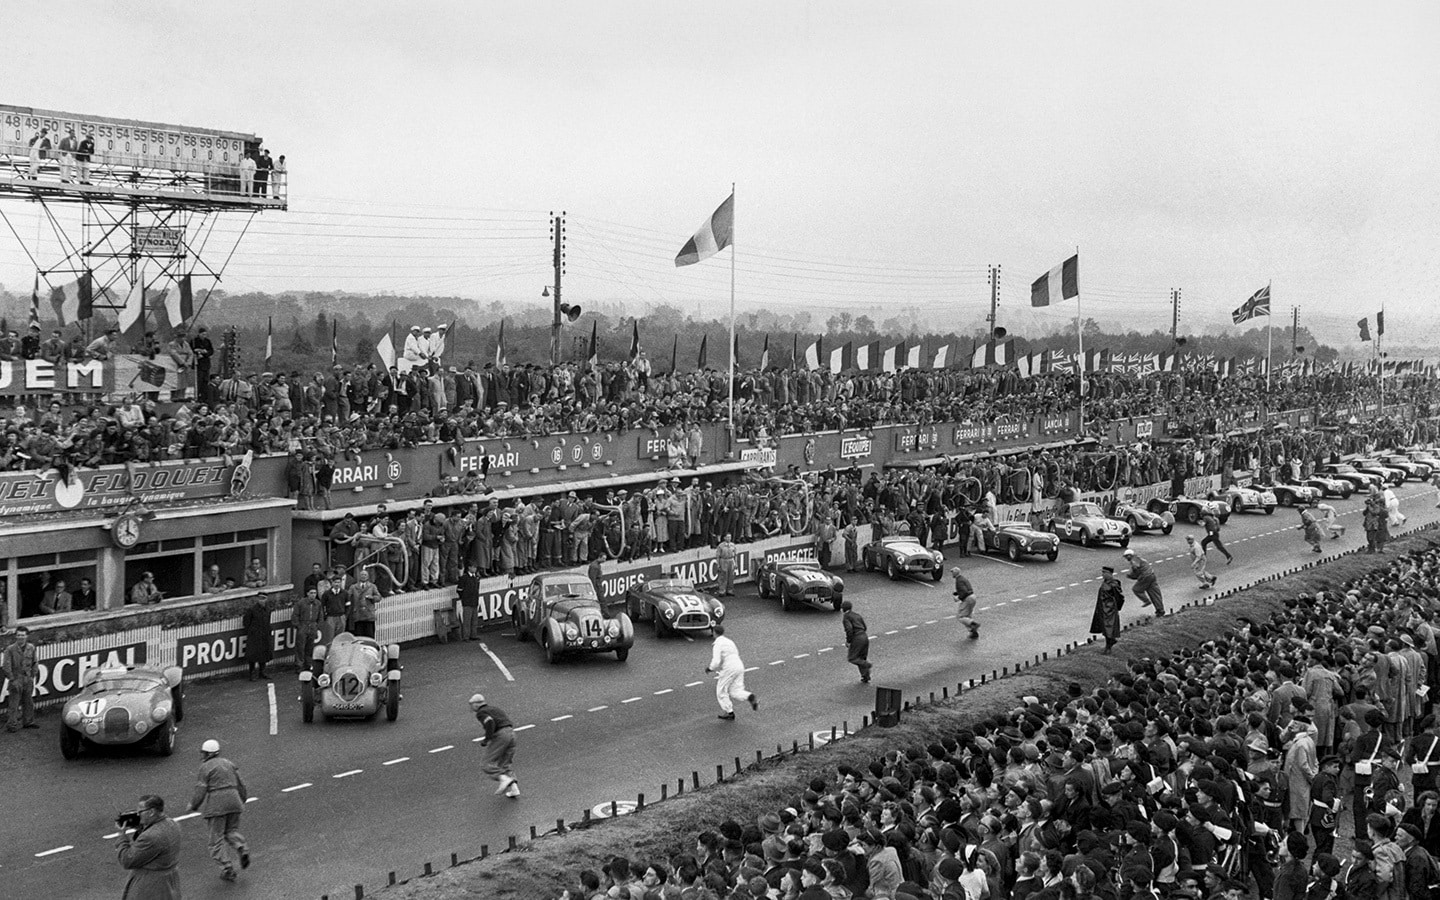 Siam Swiss Featured Stories: The 24 Hours Of Le Mans